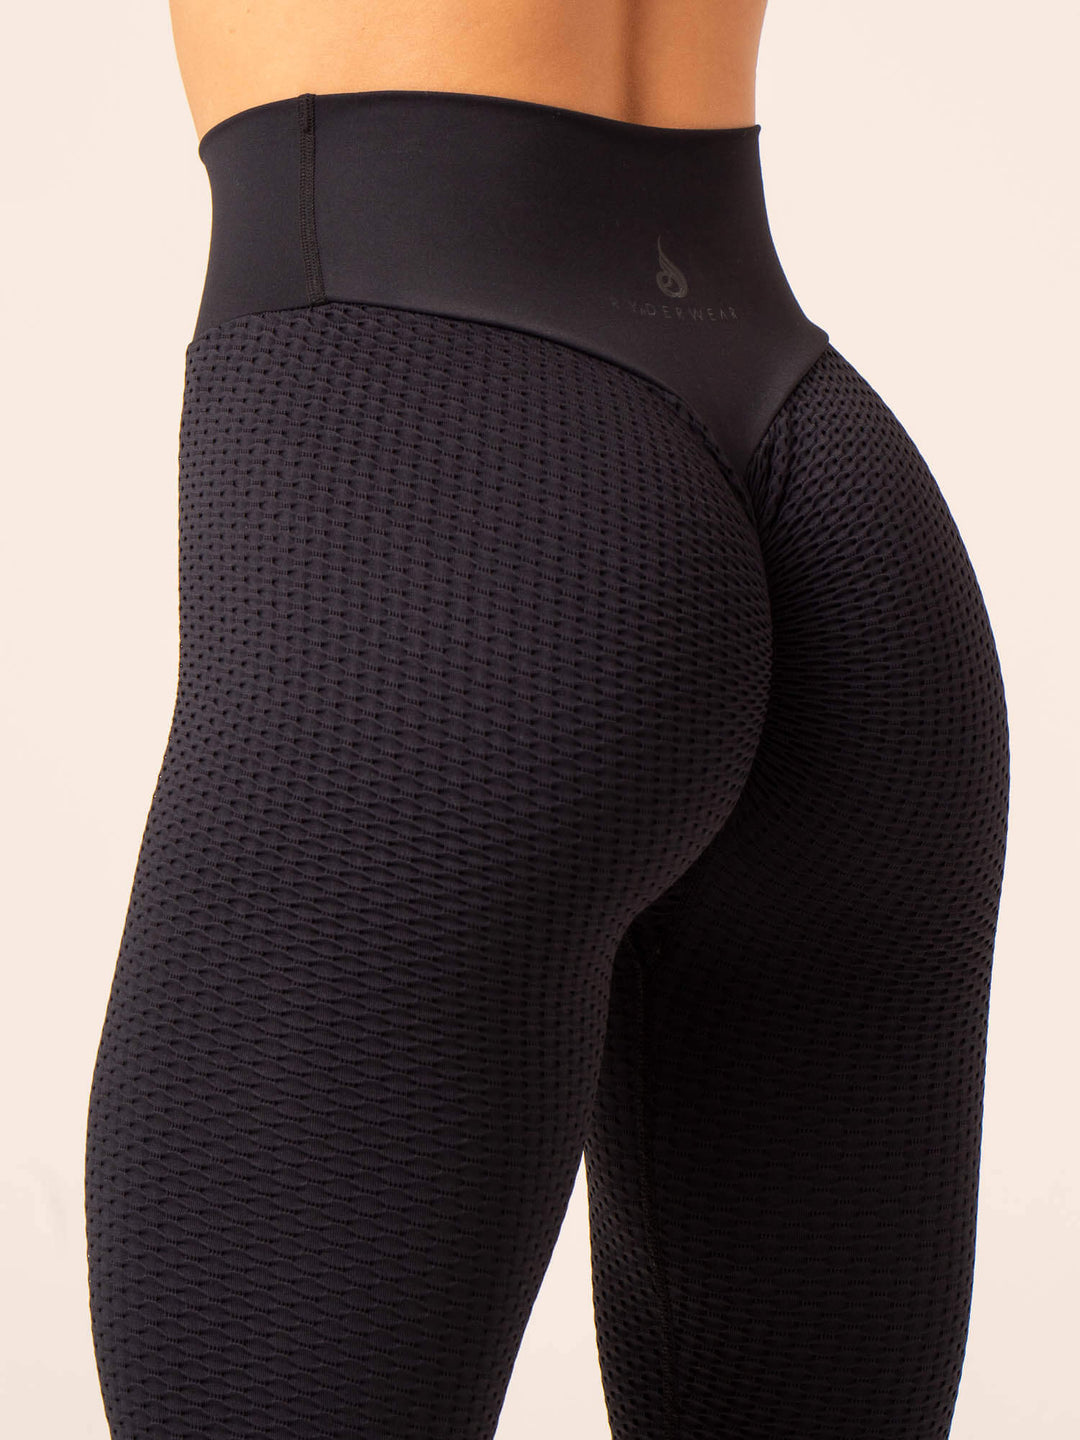 Aggregate more than 137 honeycomb textured leggings latest